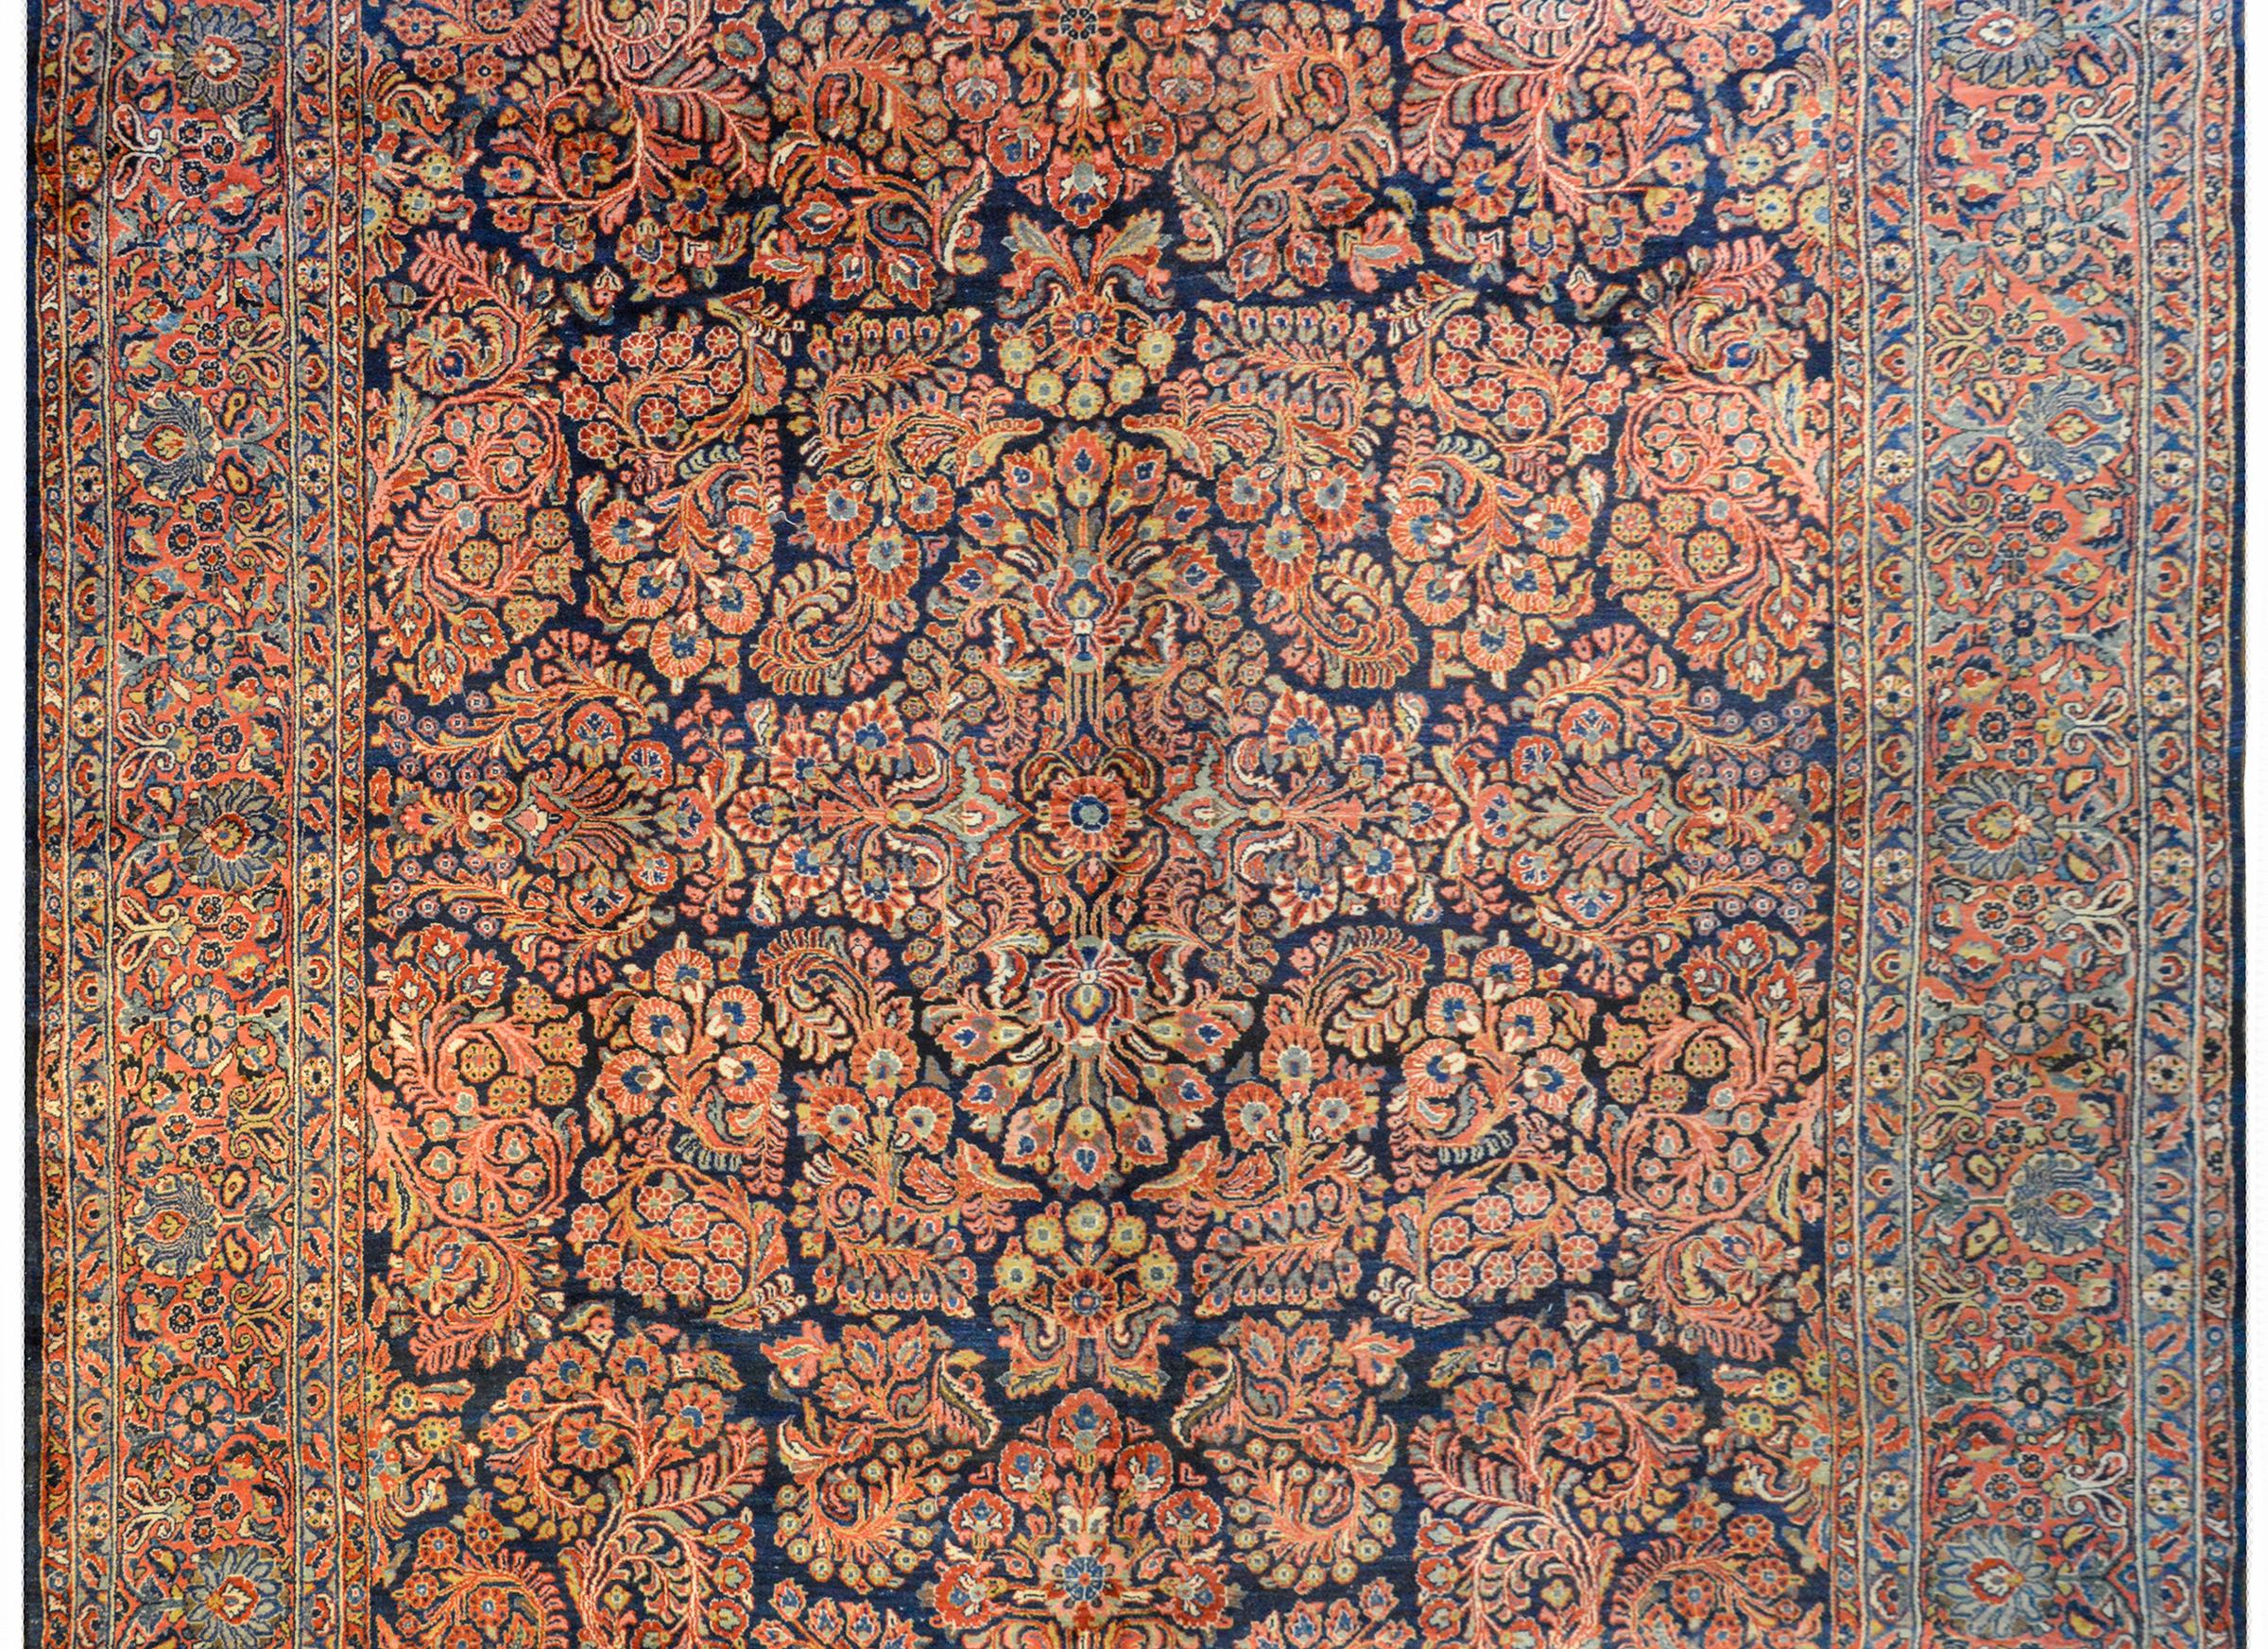 A beautiful early 20th century Persian Sarouk rug with an all-over floral cluster pattern woven in light and dark indigo, green, coral, and cream on a dark indigo background surrounded by wonderful floral patterned border with a wide central floral